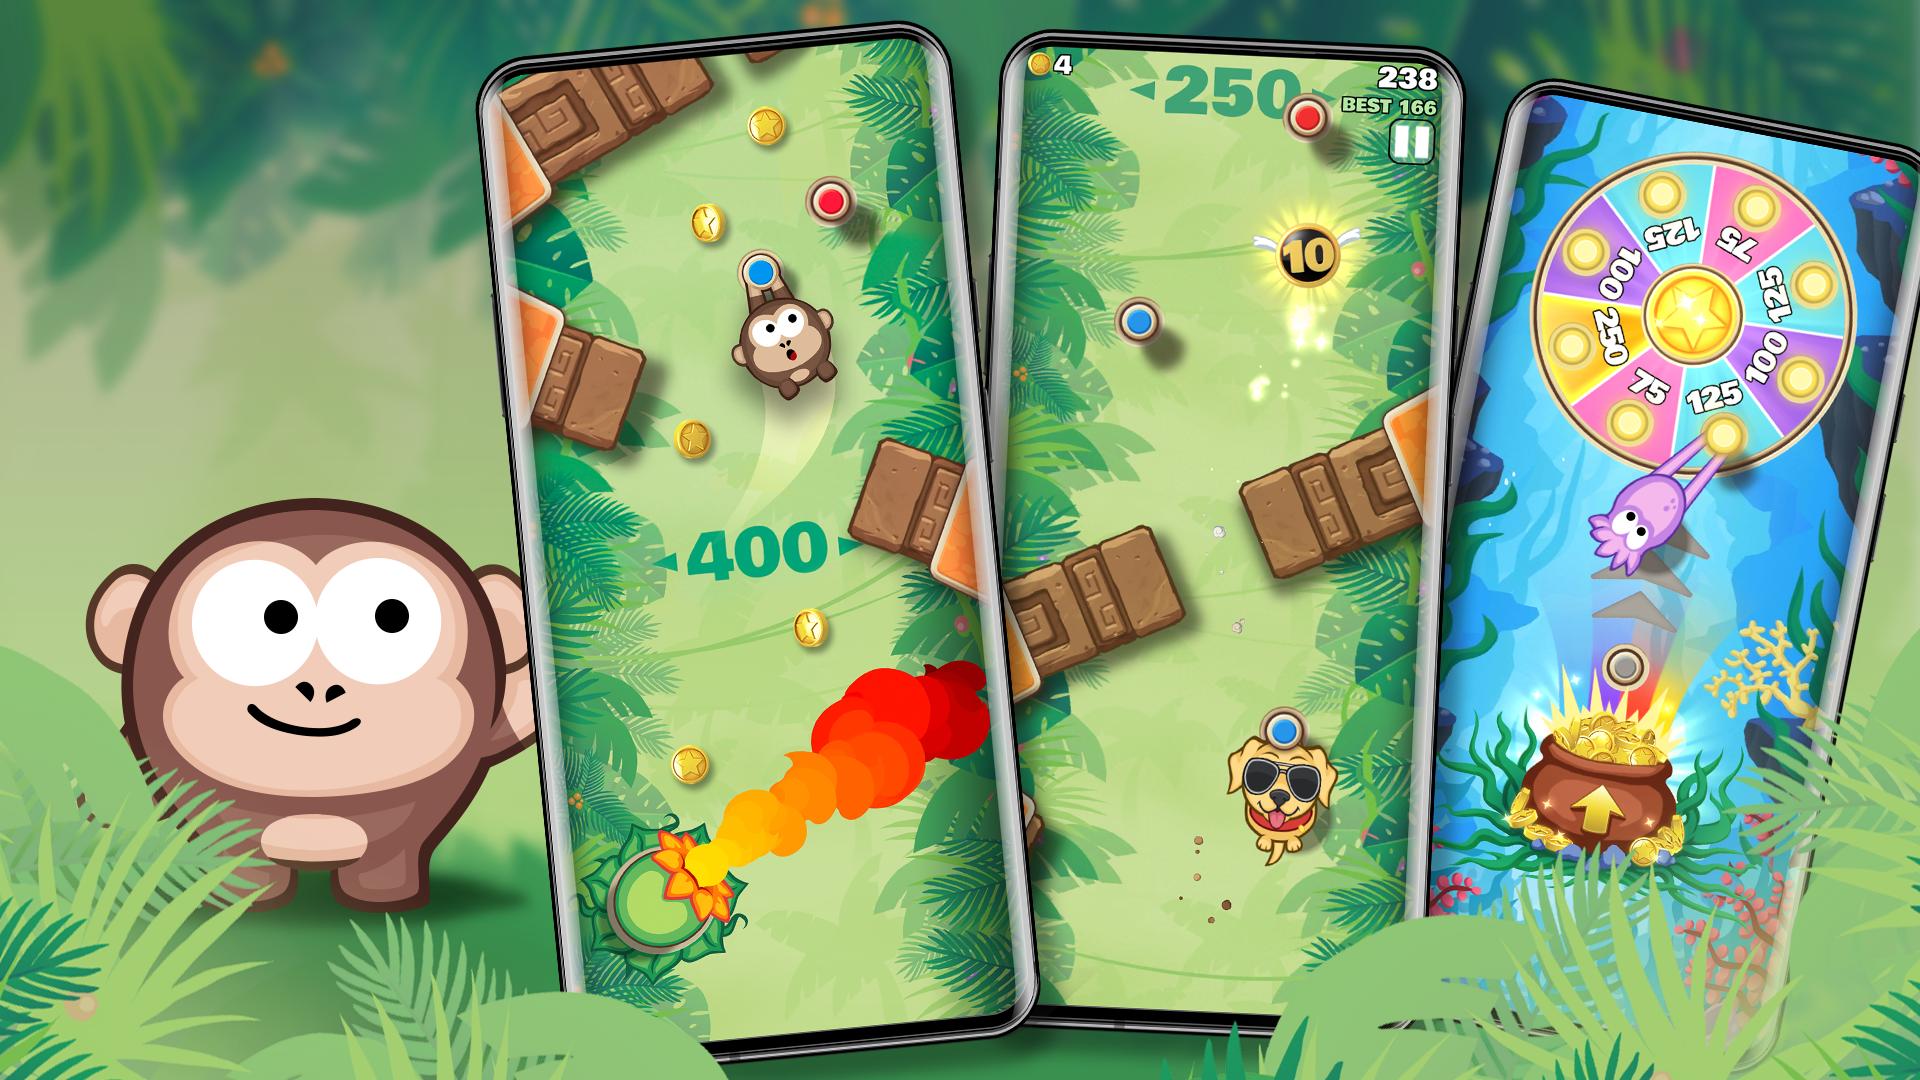 Sling Kong for Android - APK Download